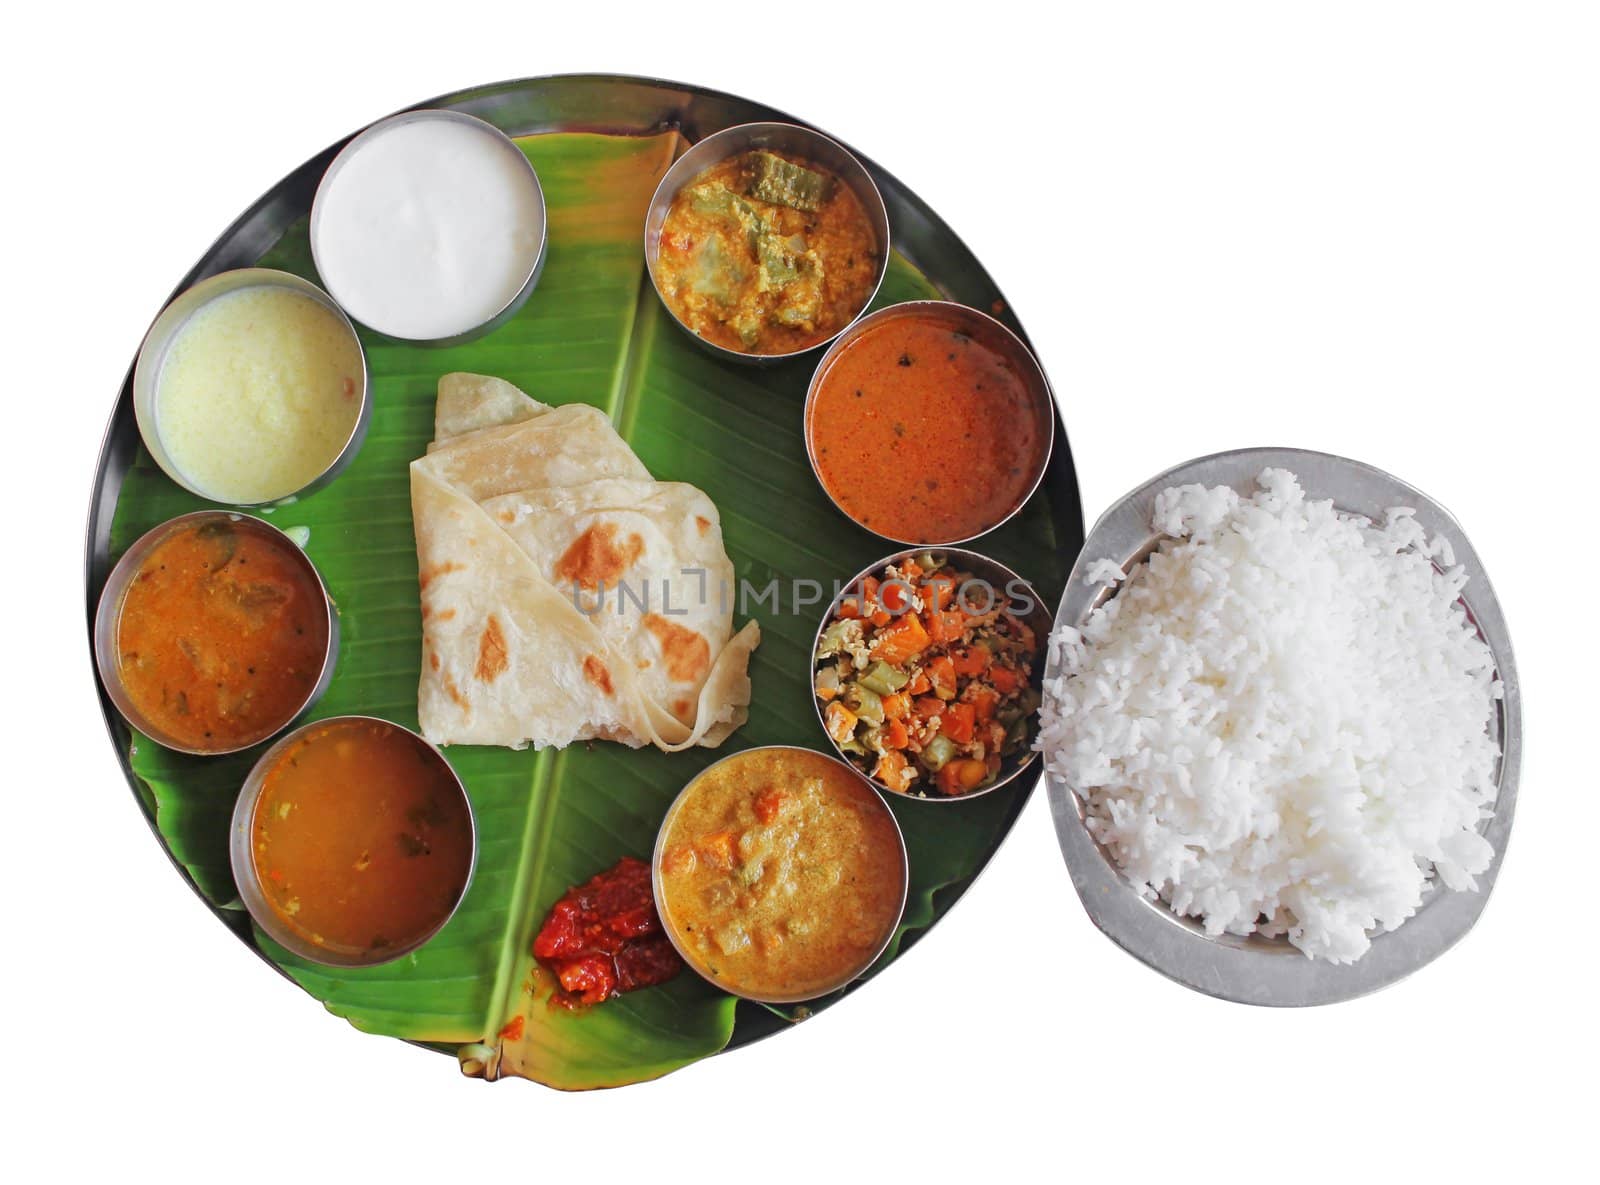 South indian plate meals on banana leaf isolated on white. Traditional vegetarian wholesome indian food with variety of curries, rasam, sambar, rice and chapatti.